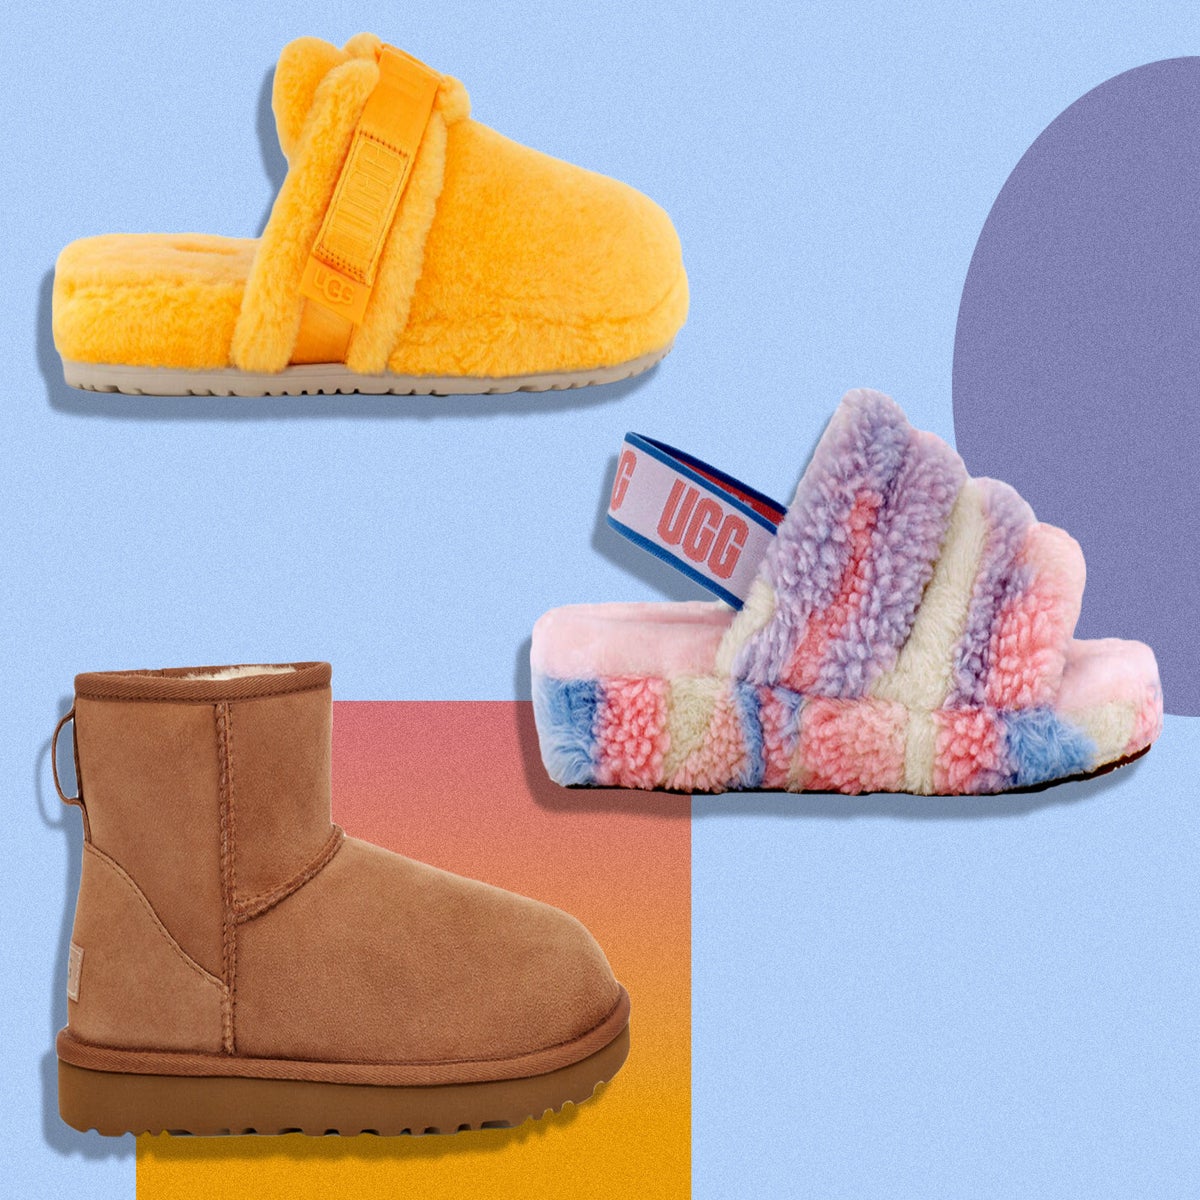 Forget Uggs, Moon Boots Are The It-Girls' Divisive Winter Boot